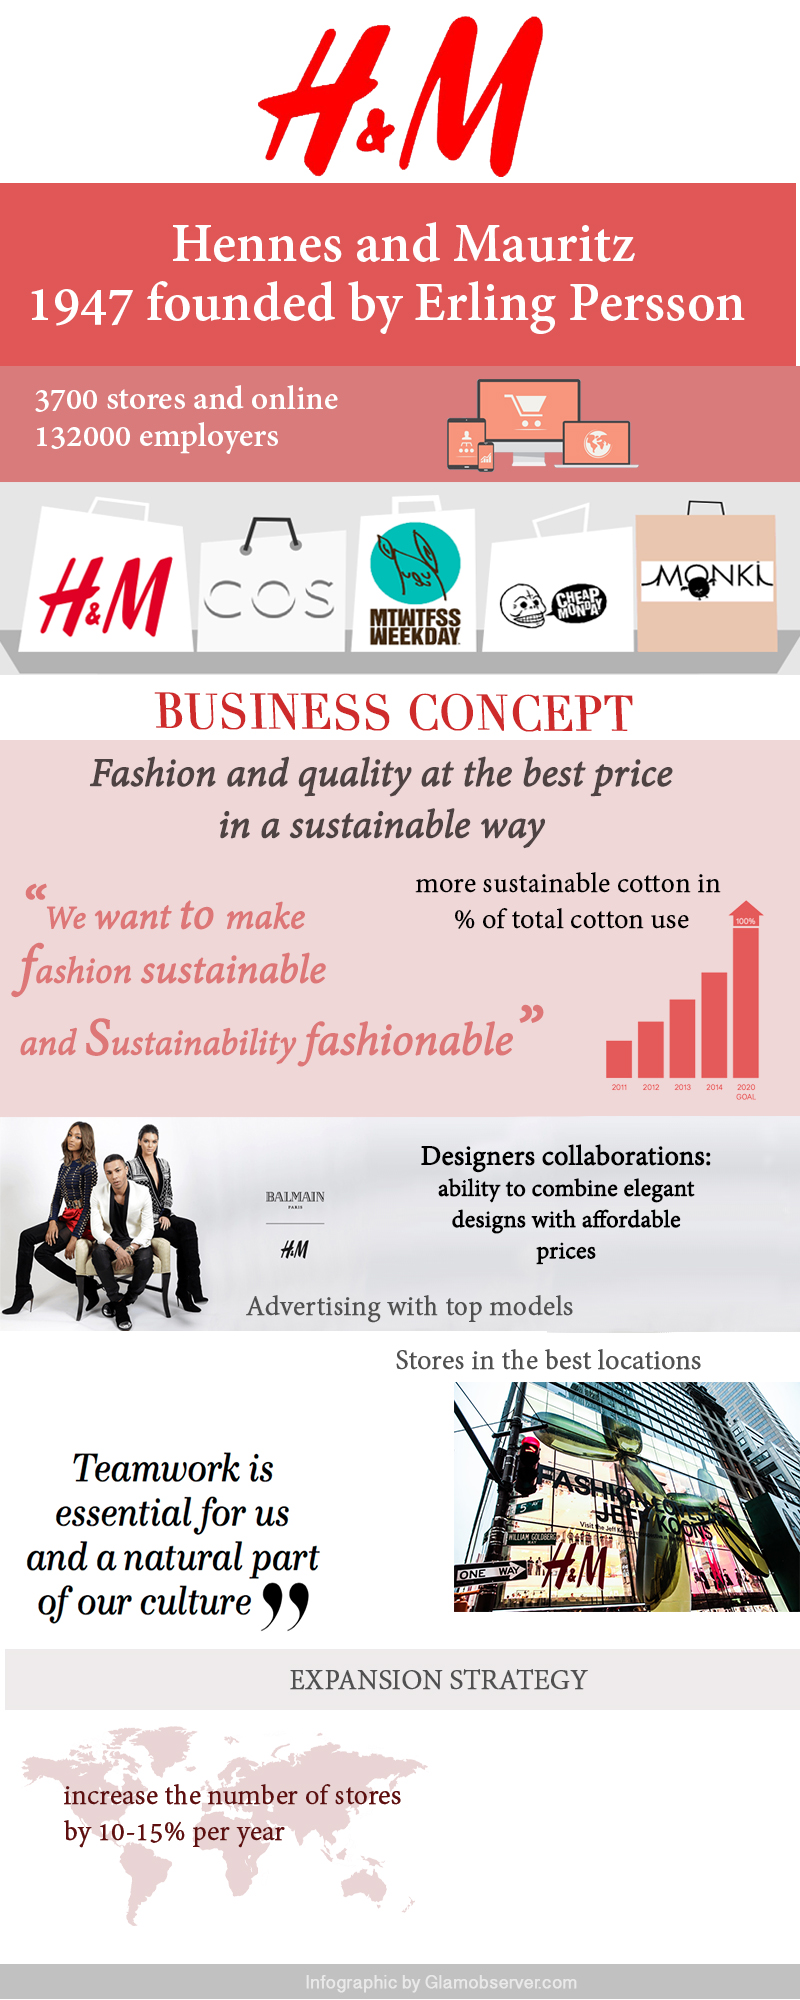 business plan of h&m